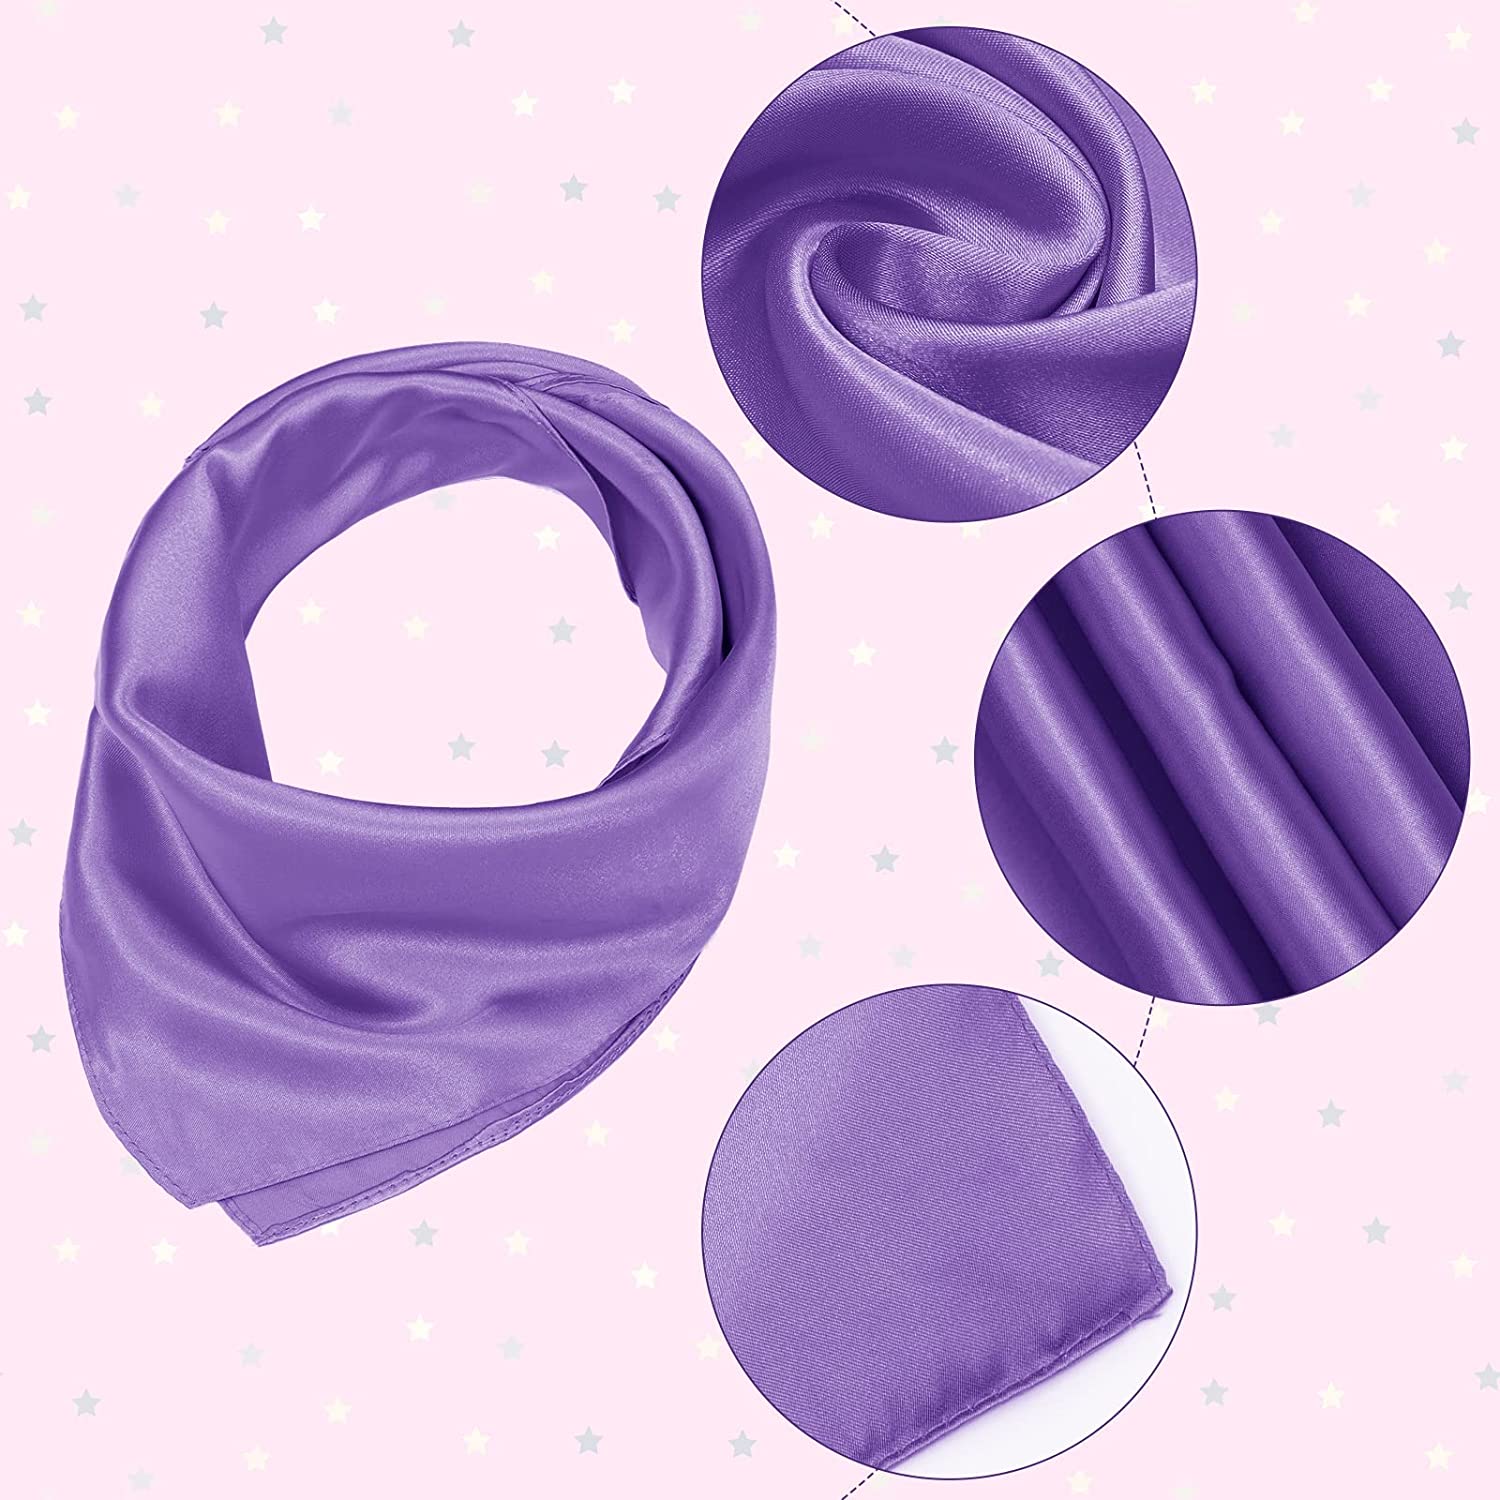 3 Pieces Halloween Satin Square Scarf Women Solid Color Neck Head Scarves Neckerchief for Women Girls